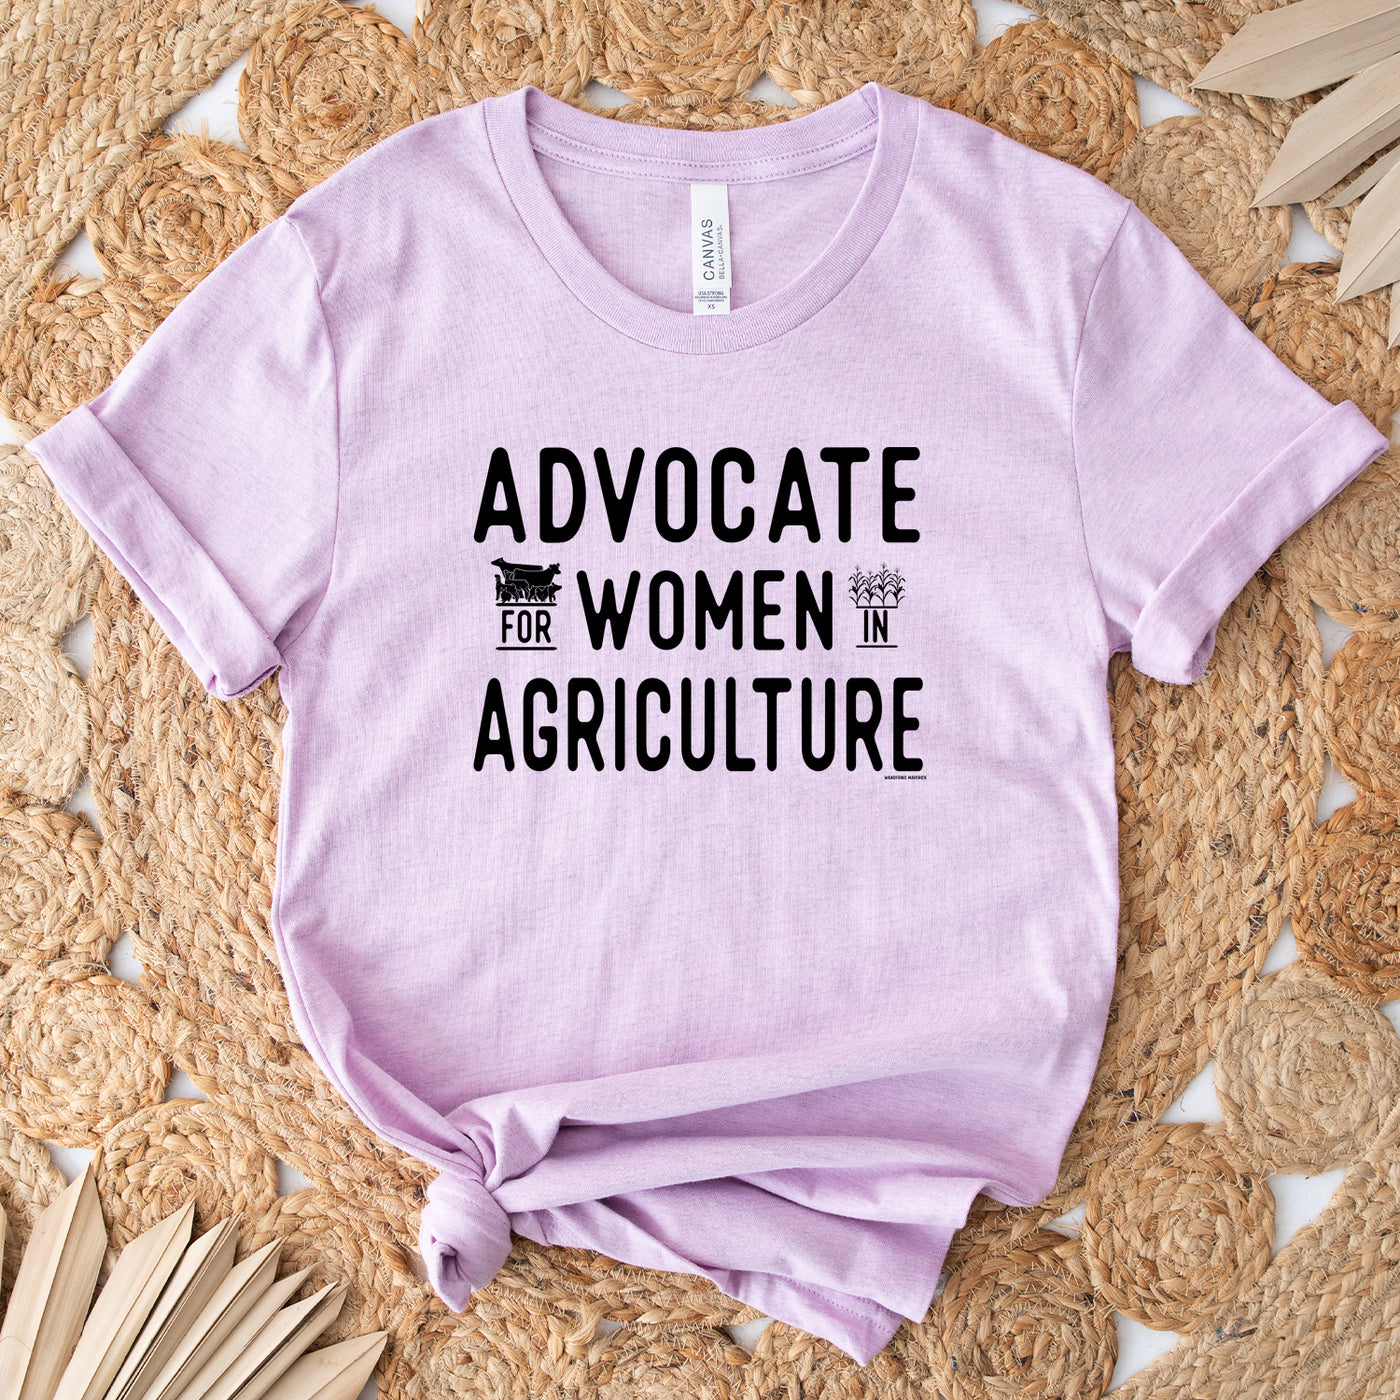 Advocate For Women In Agriculture T-Shirt (XS-4XL) - Multiple Colors!